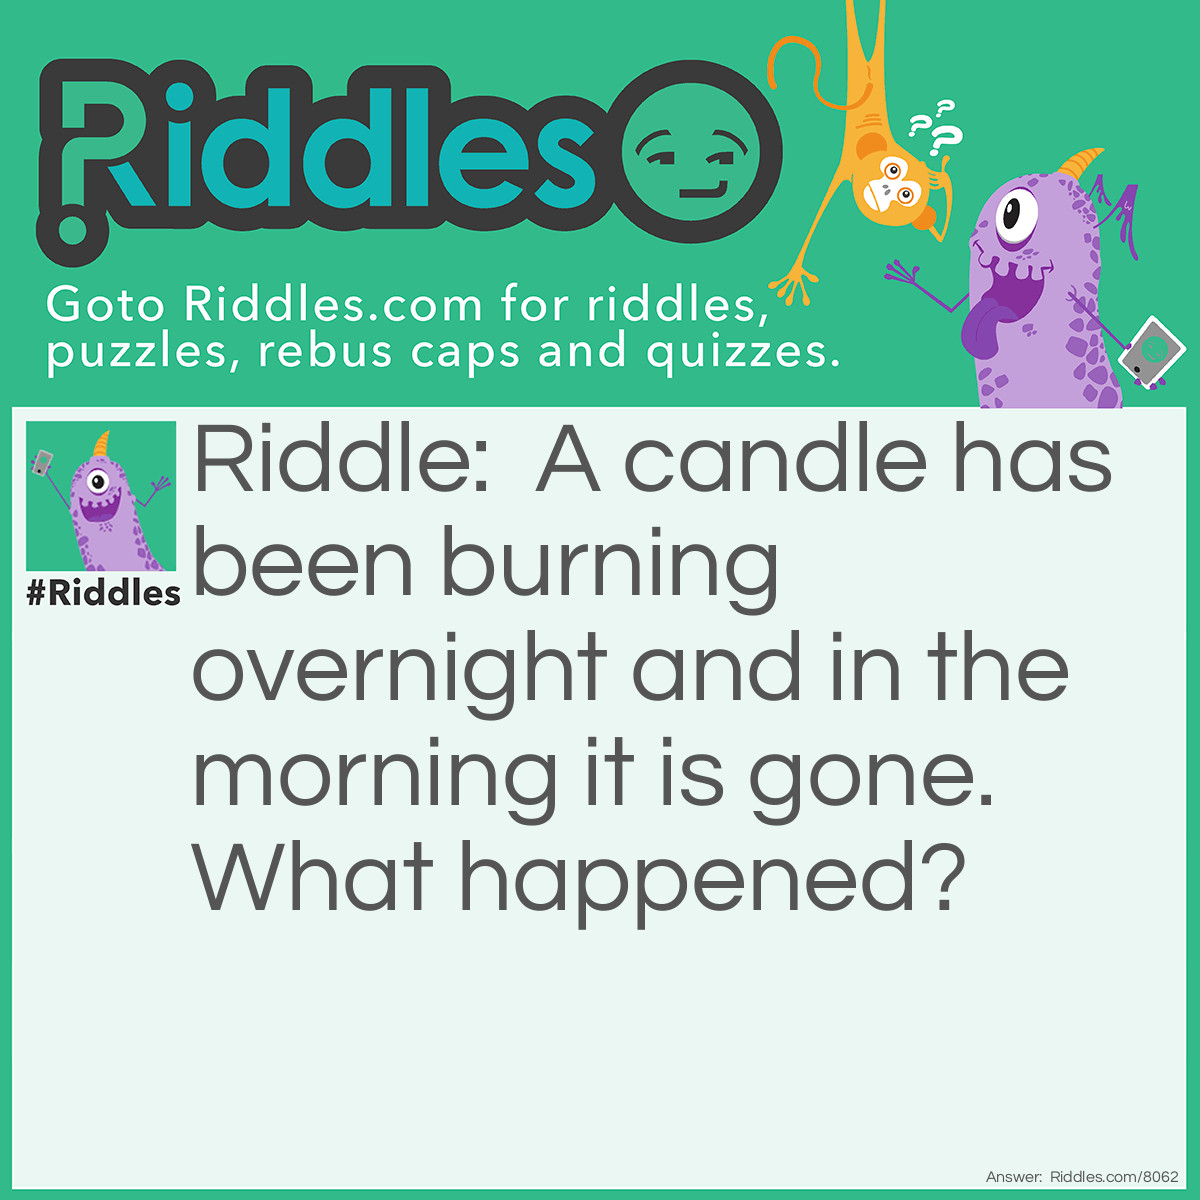 Riddle: A candle has been burning overnight and in the morning it is gone. What happened? Answer: It melted.